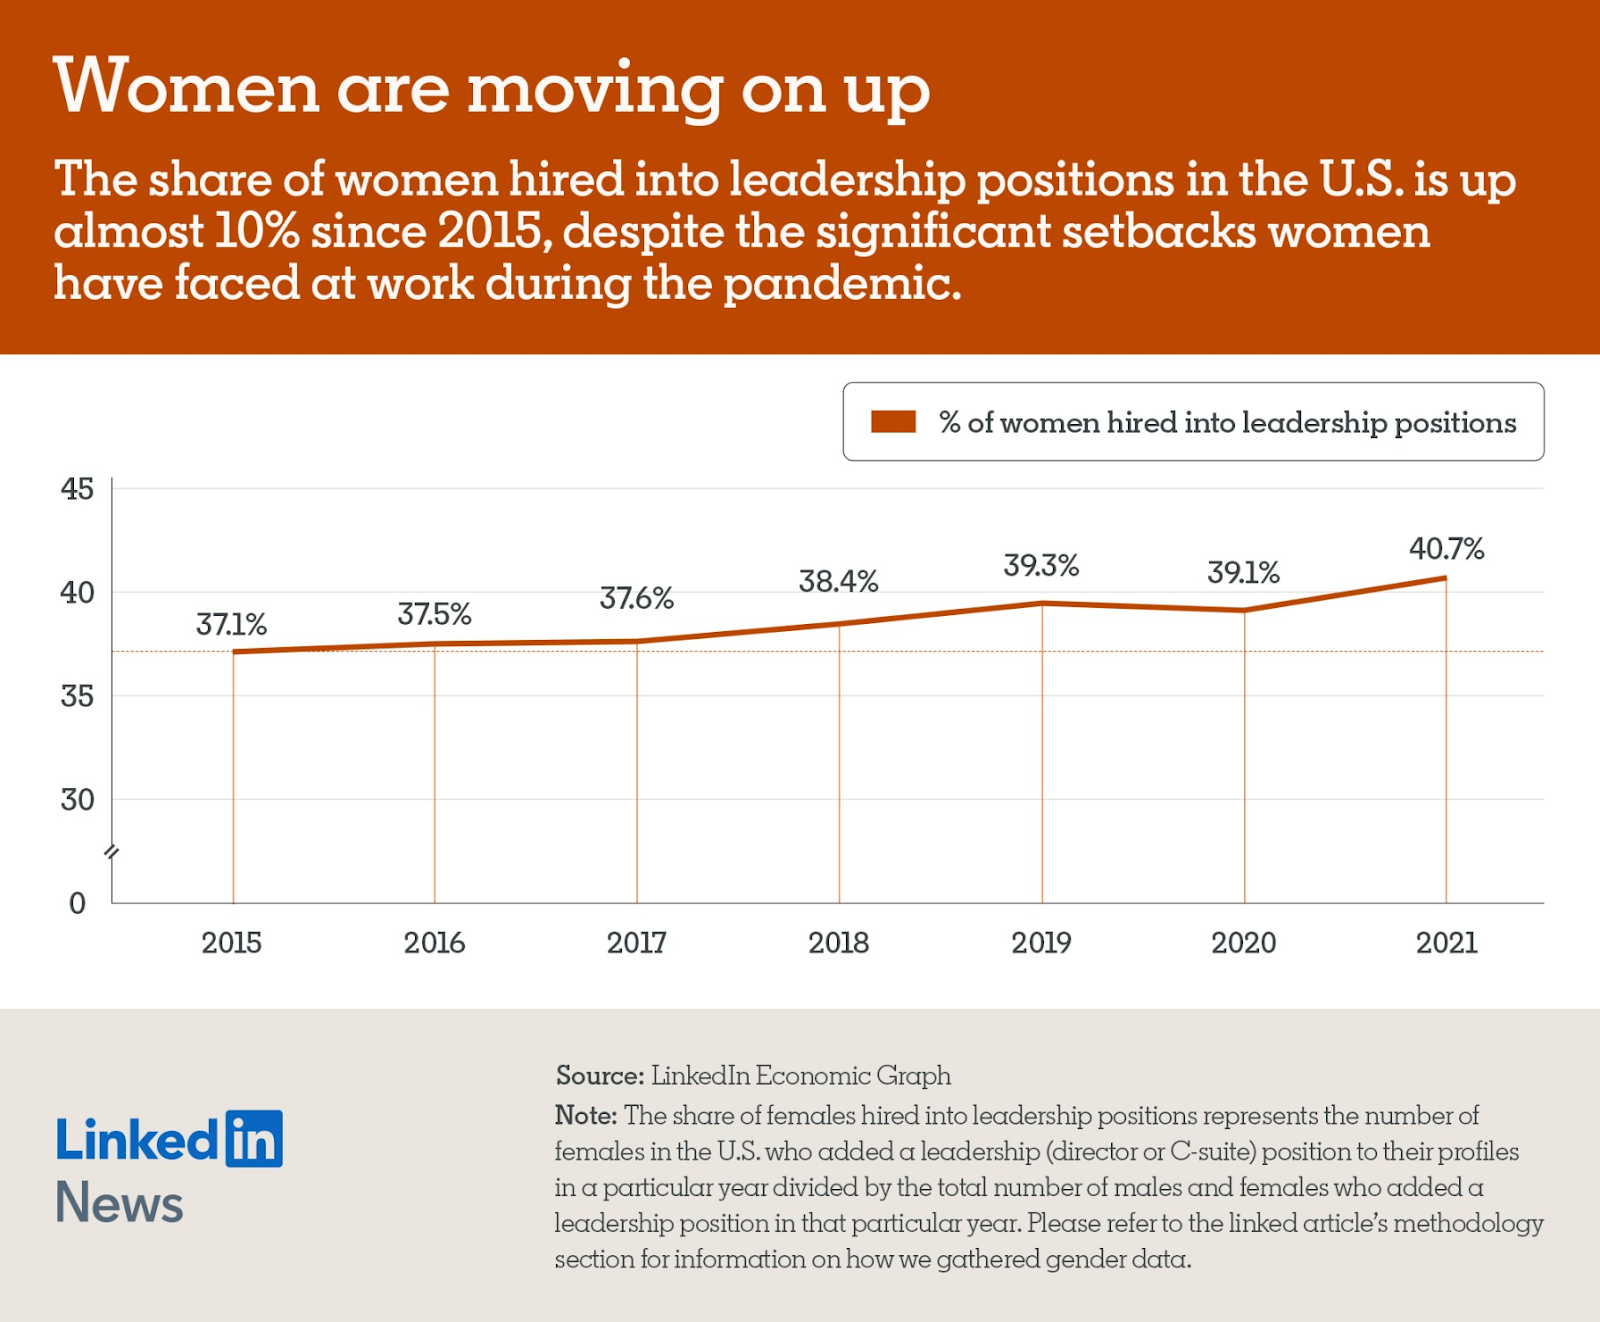 Graph: Women are moving on up. The share of women hired into leadership positions in the U.S. is up almost 10% since 2015, despite the significant setbacks women have faced at work during the pandemic. 